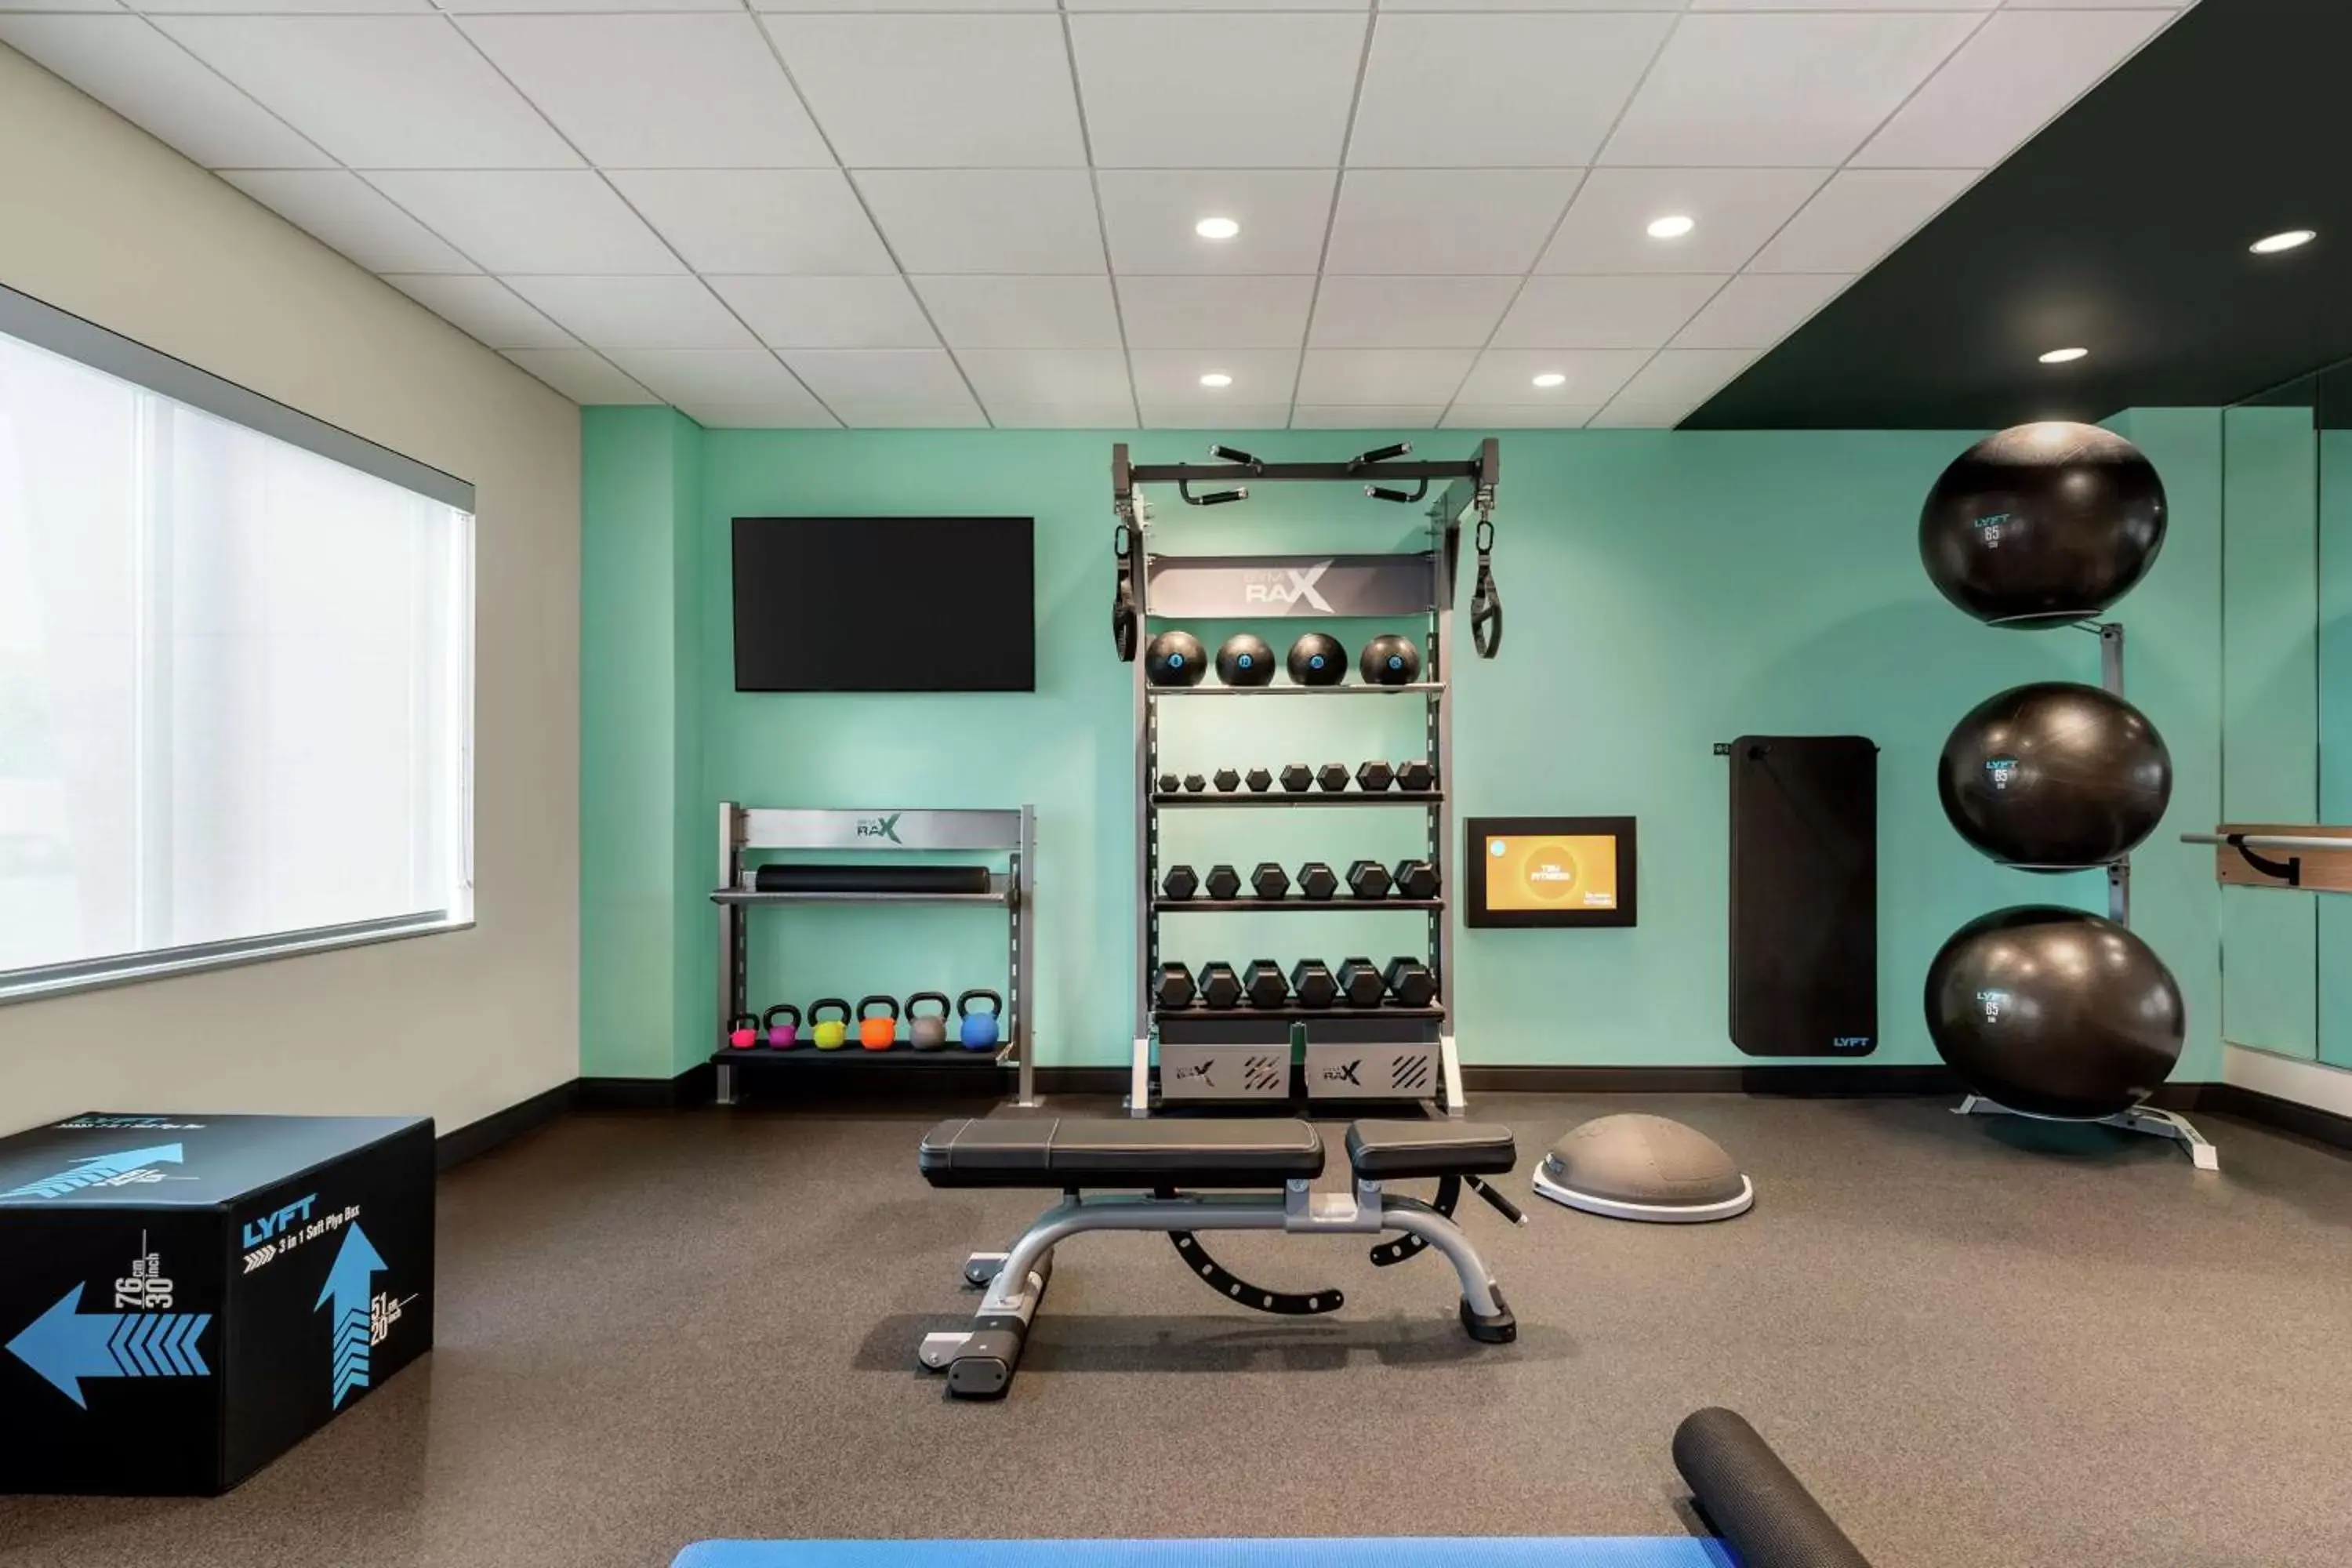 Fitness centre/facilities, Fitness Center/Facilities in Tru By Hilton Hershey Chocolate Avenue